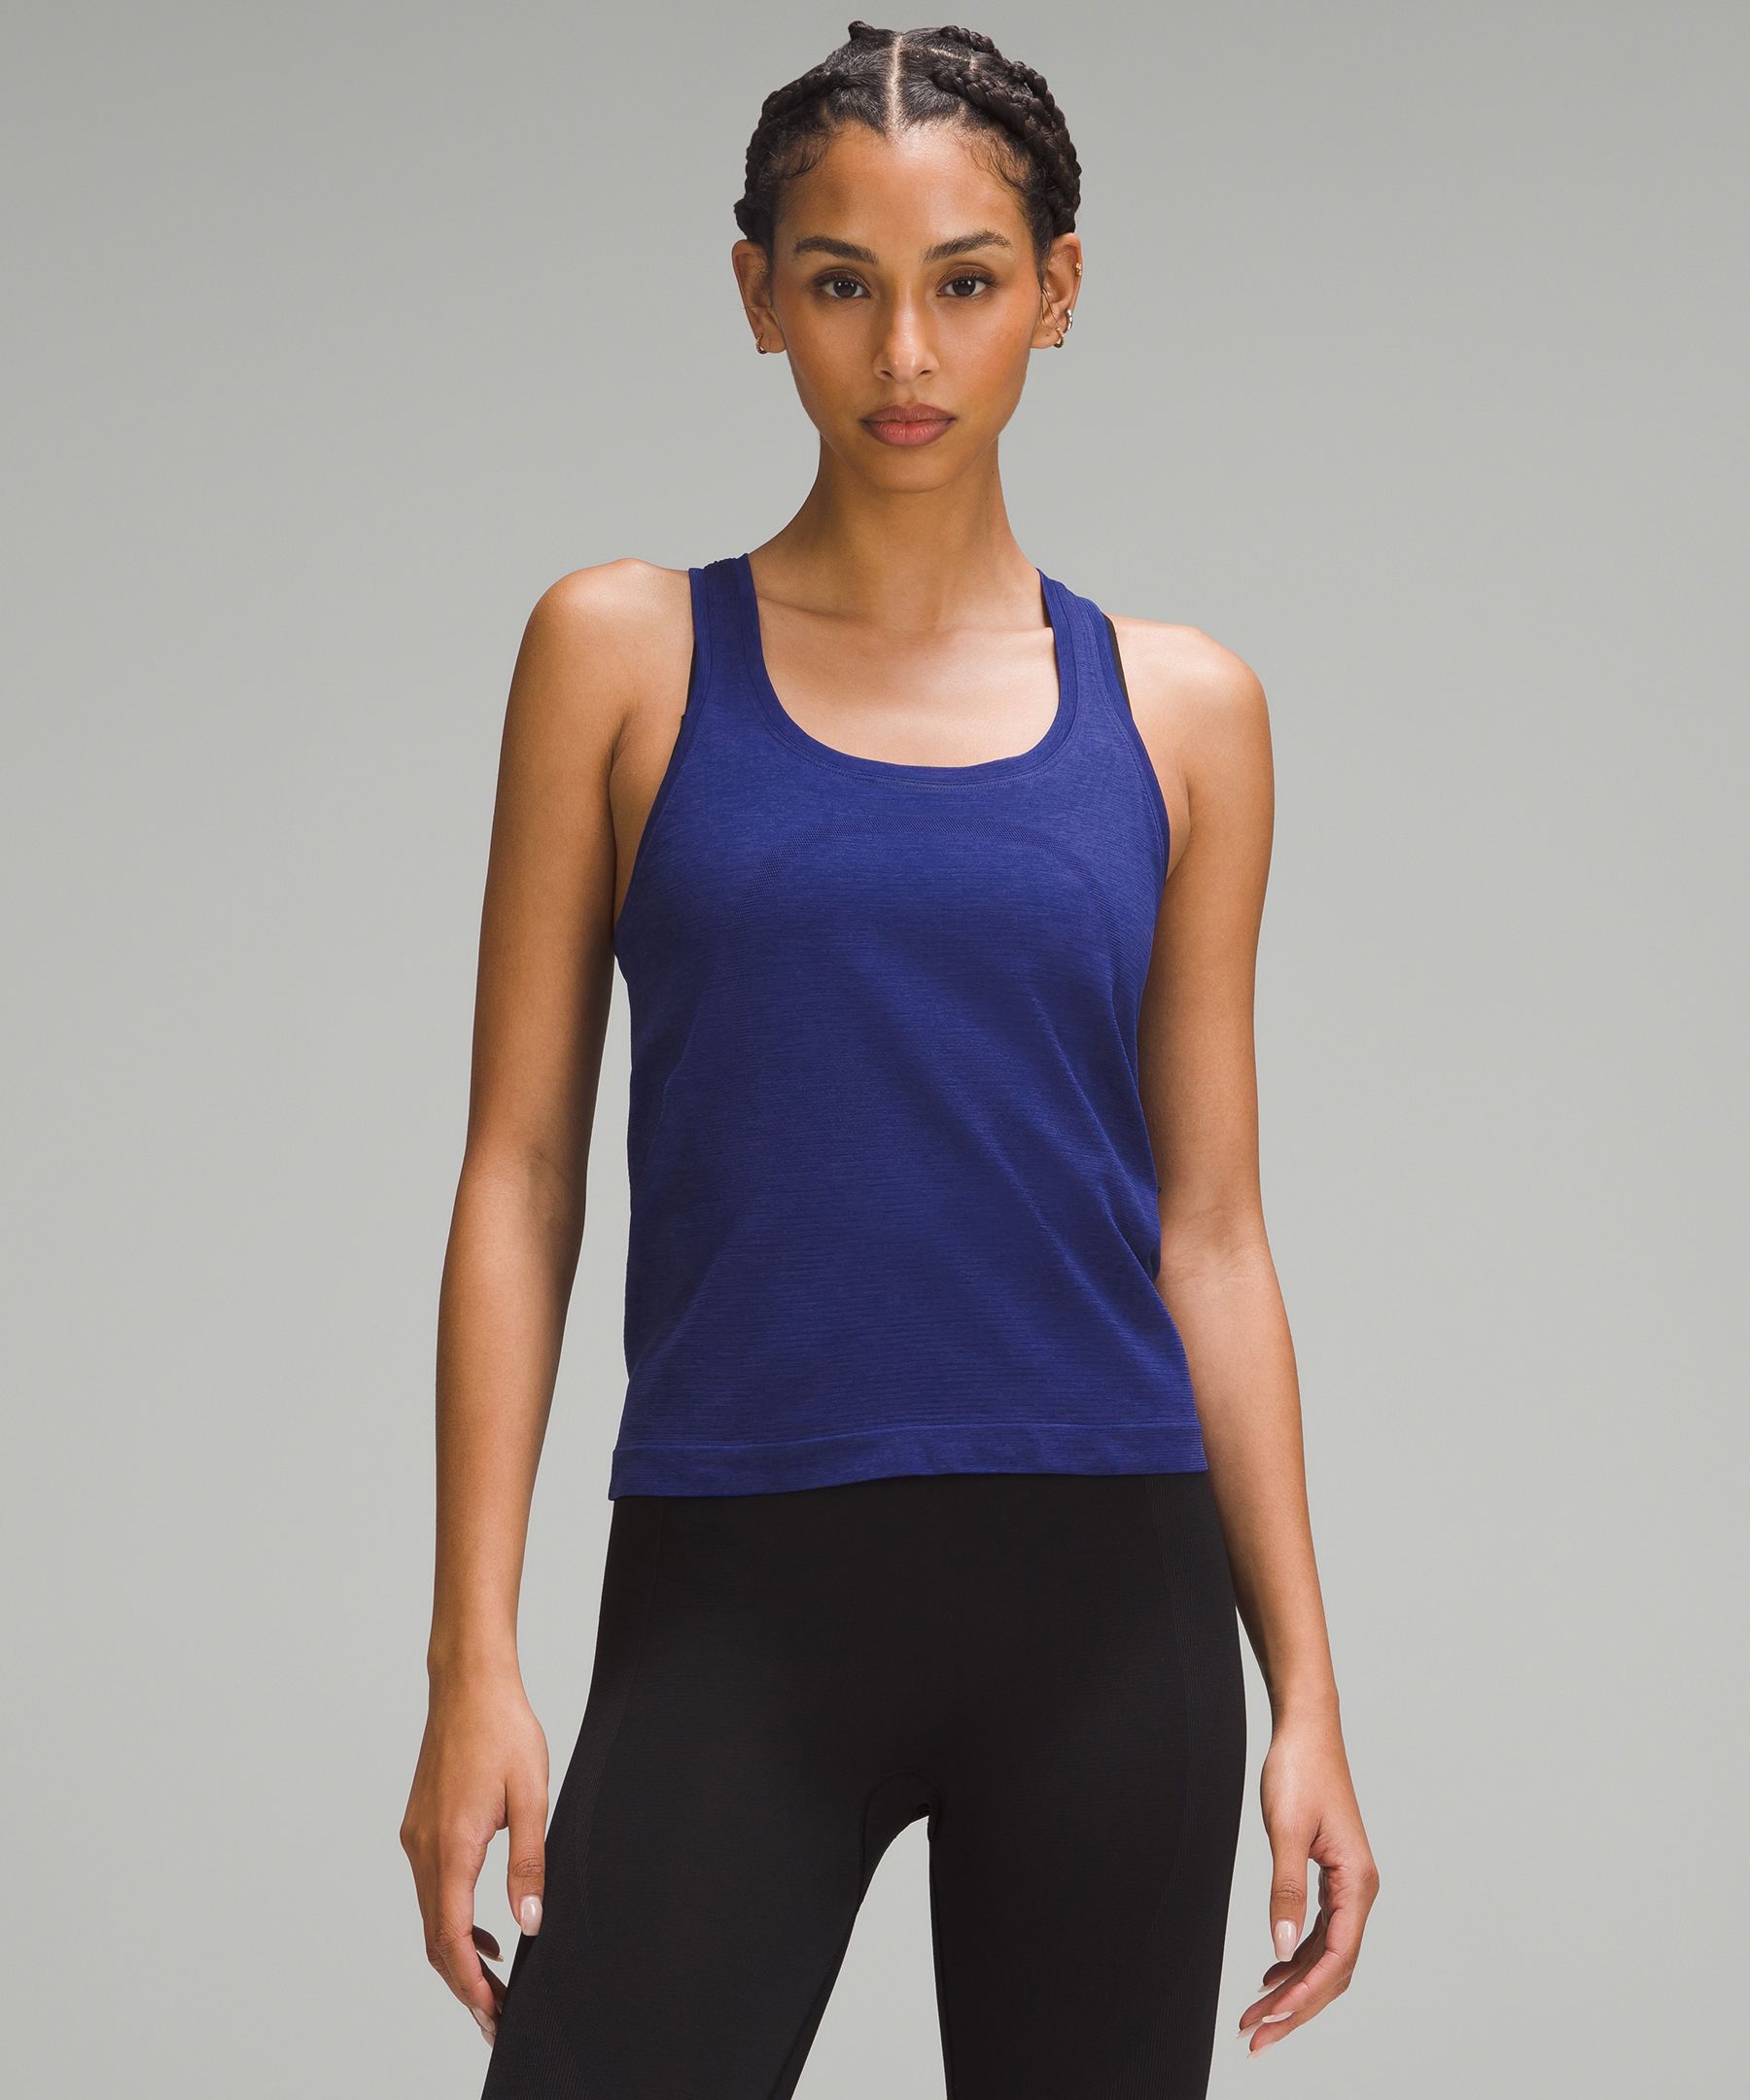 Women's Slim Fit Tank Top - A New Day™ Navy Blue M : Target